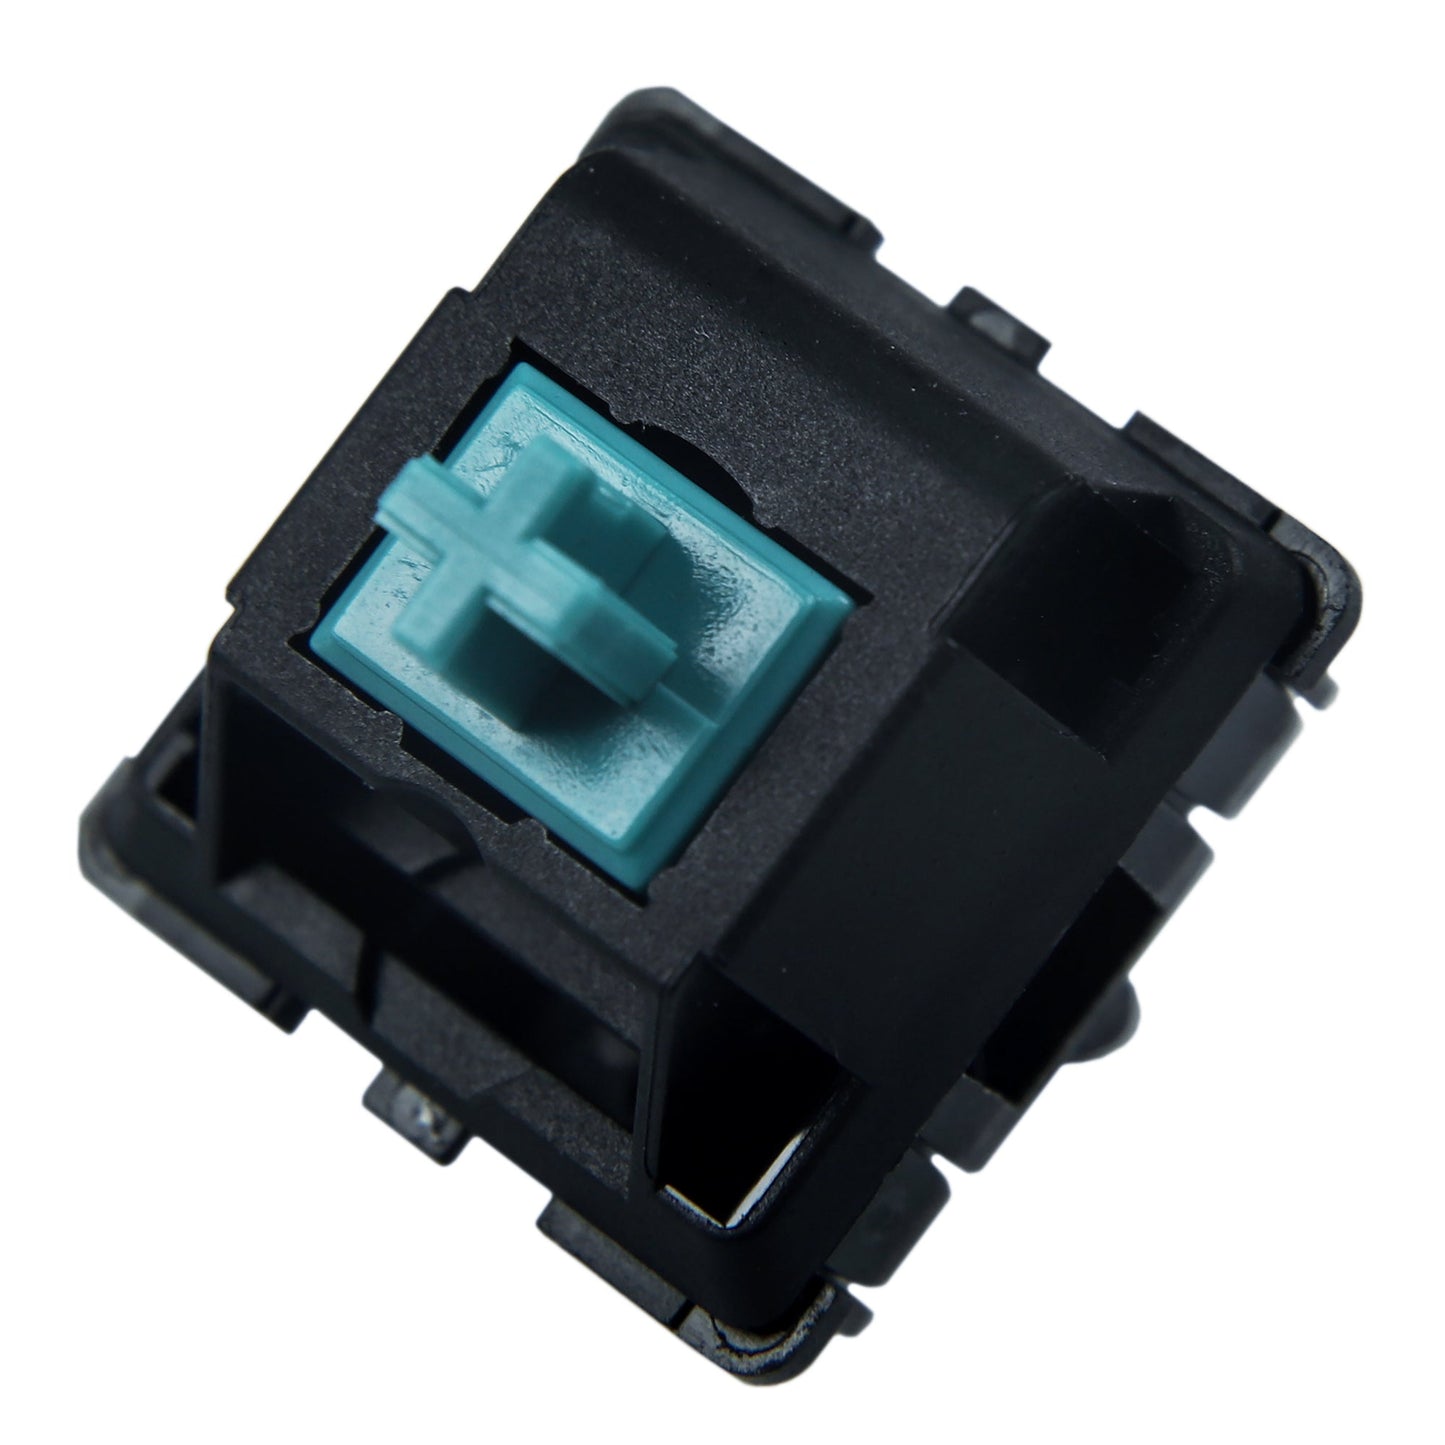 JWK C v2 Black Blue(Lubed Tactile Clicky 5 Pin Switches) - IPOPULARSHOP